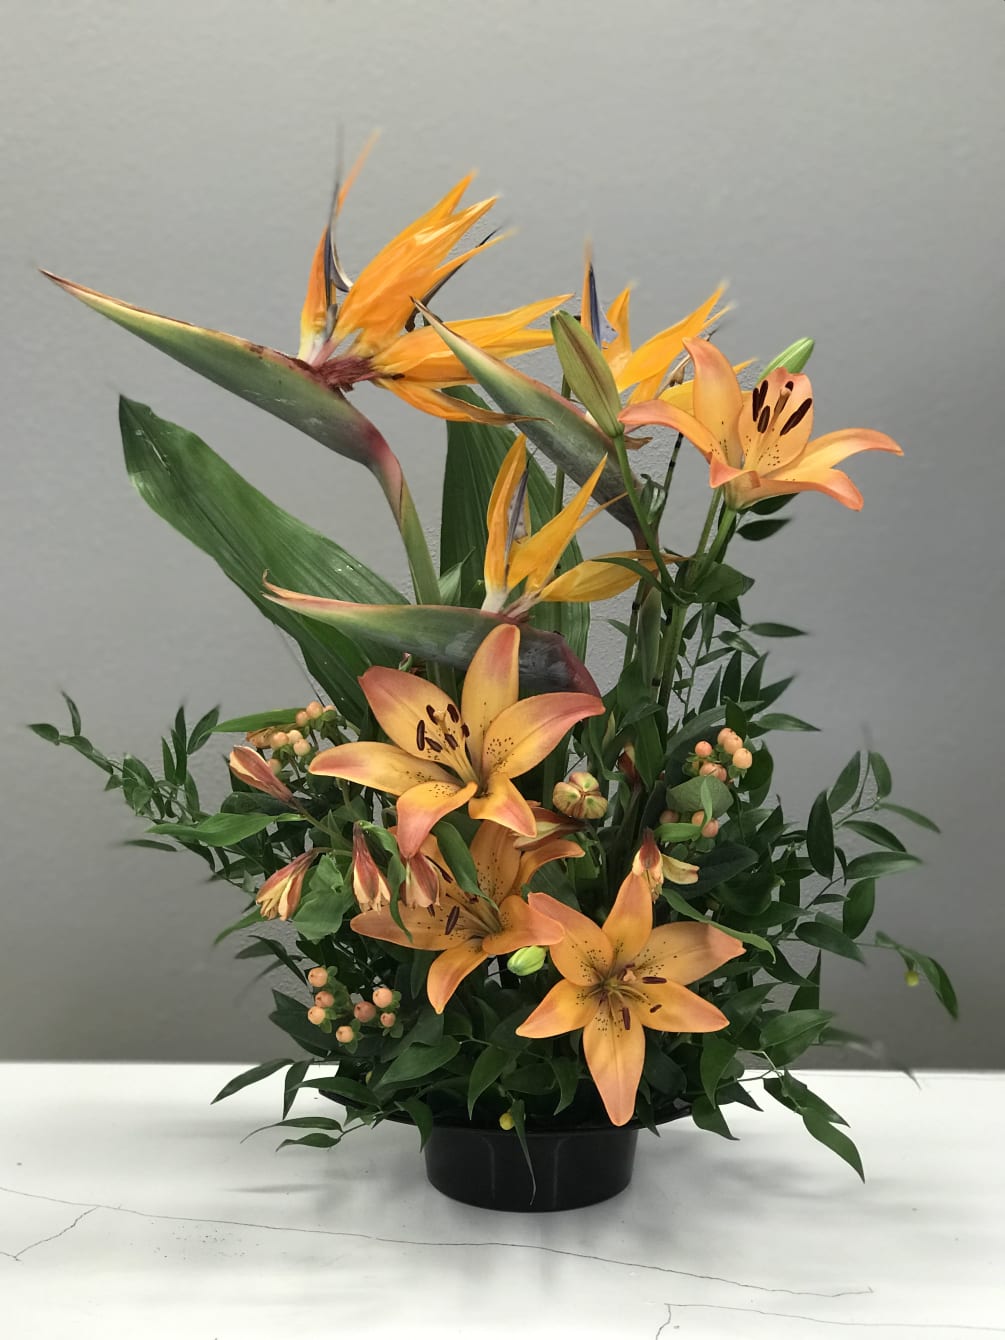 Birds of Paradise rising from orange lilies and a bed a tropical